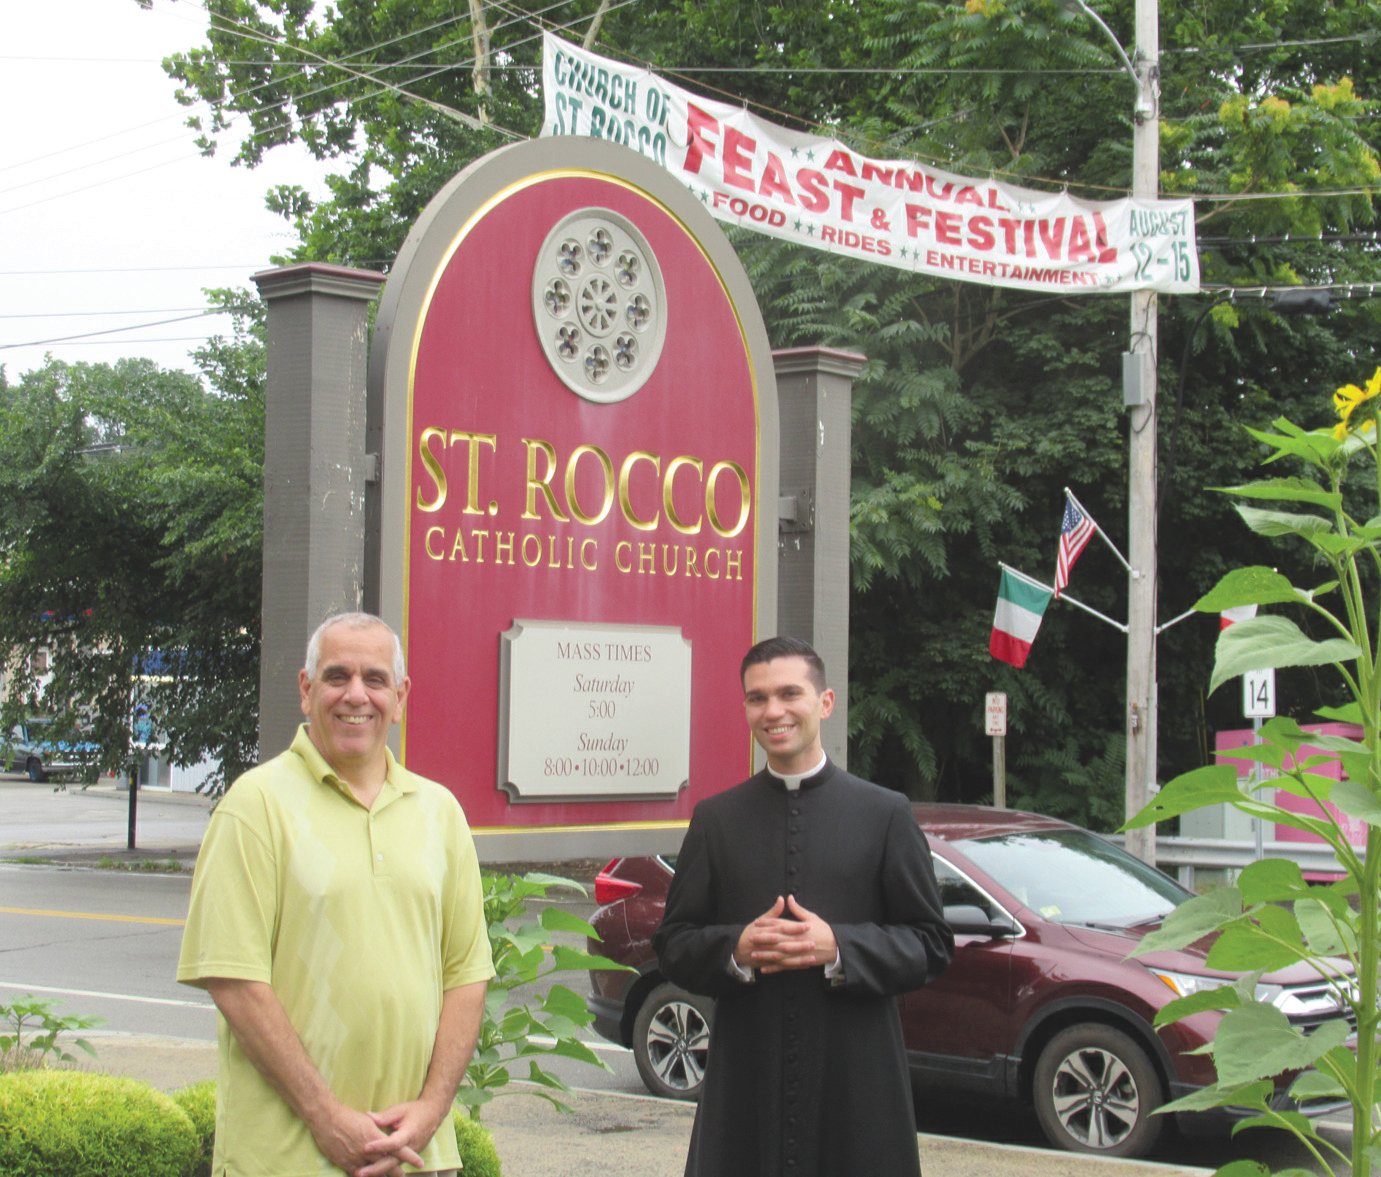 DIVINE DUTY: Richard Montella, left, long-serving co-chairman of the now 81-year-old Saint Rocco’s Feast and Festival, is joined by Seminarian Stephan Coutcher outside the Roman Catholic Church conveniently located on the corner of Plainfield Pike and Atwood Avenue in Johnston. (Sun Rise photos by Pete Fontaine) PIX TWO IMG 4178